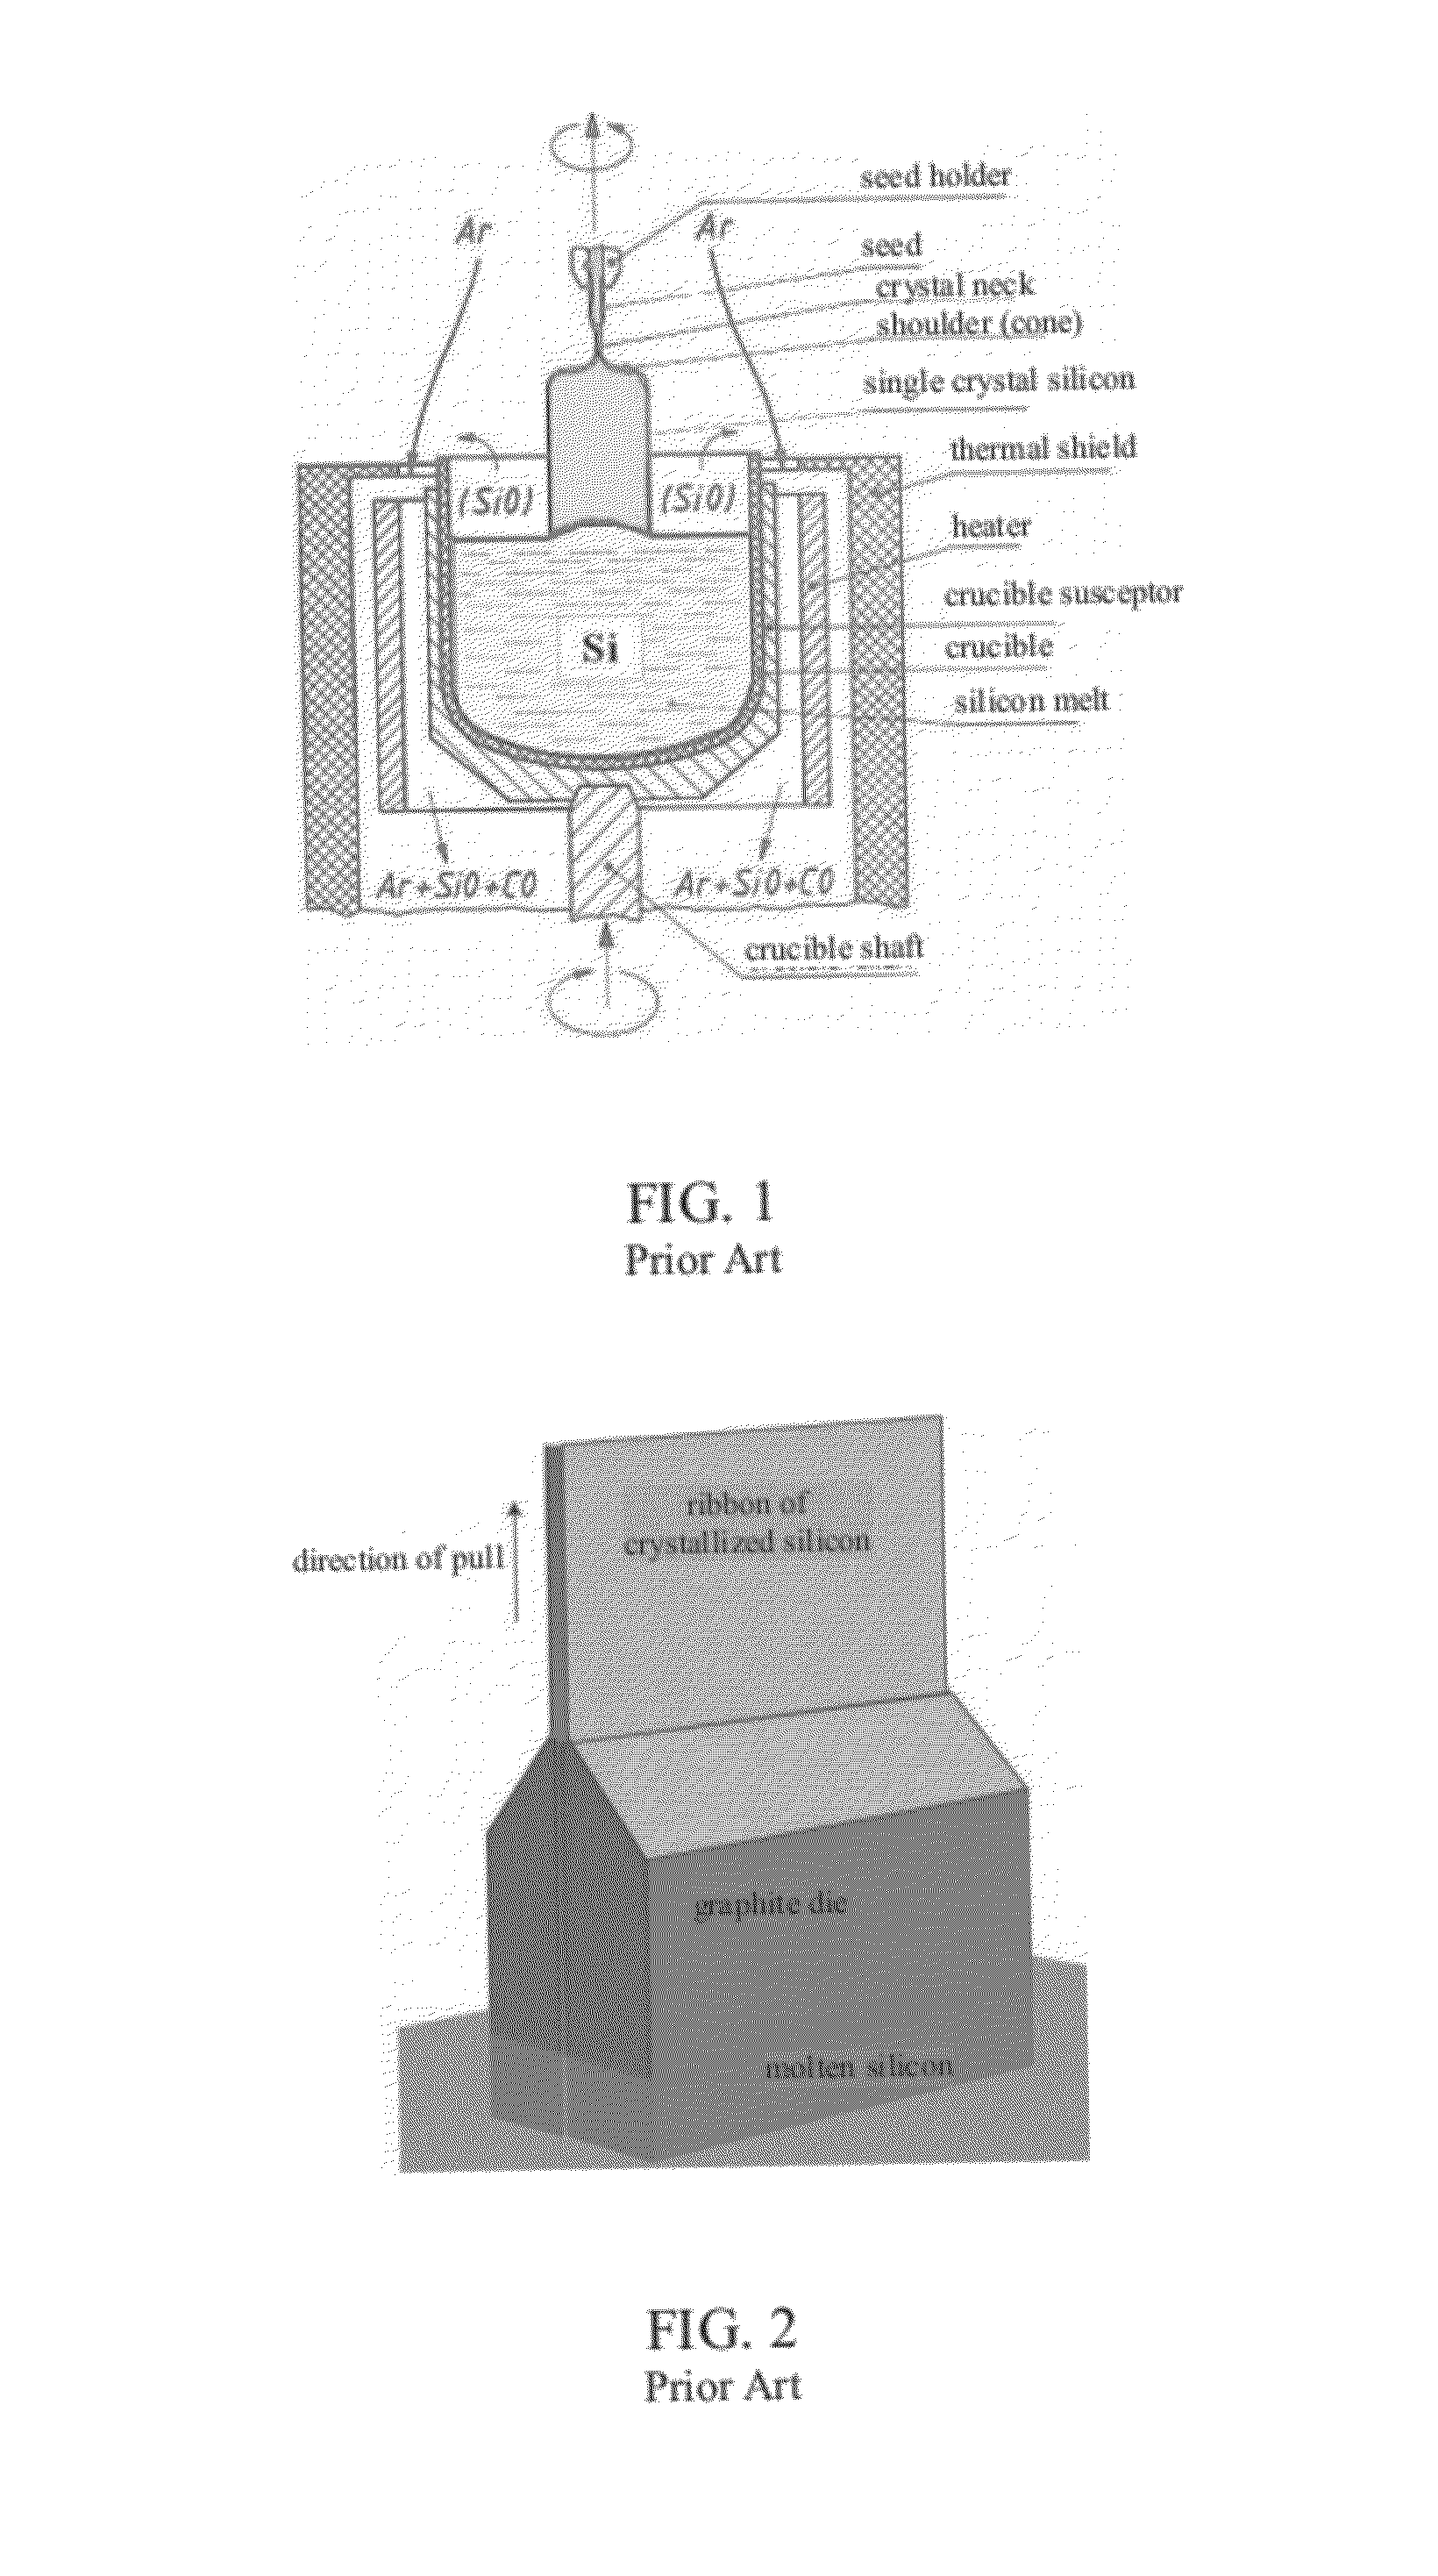 Polariscope stress measurement tool and method of use